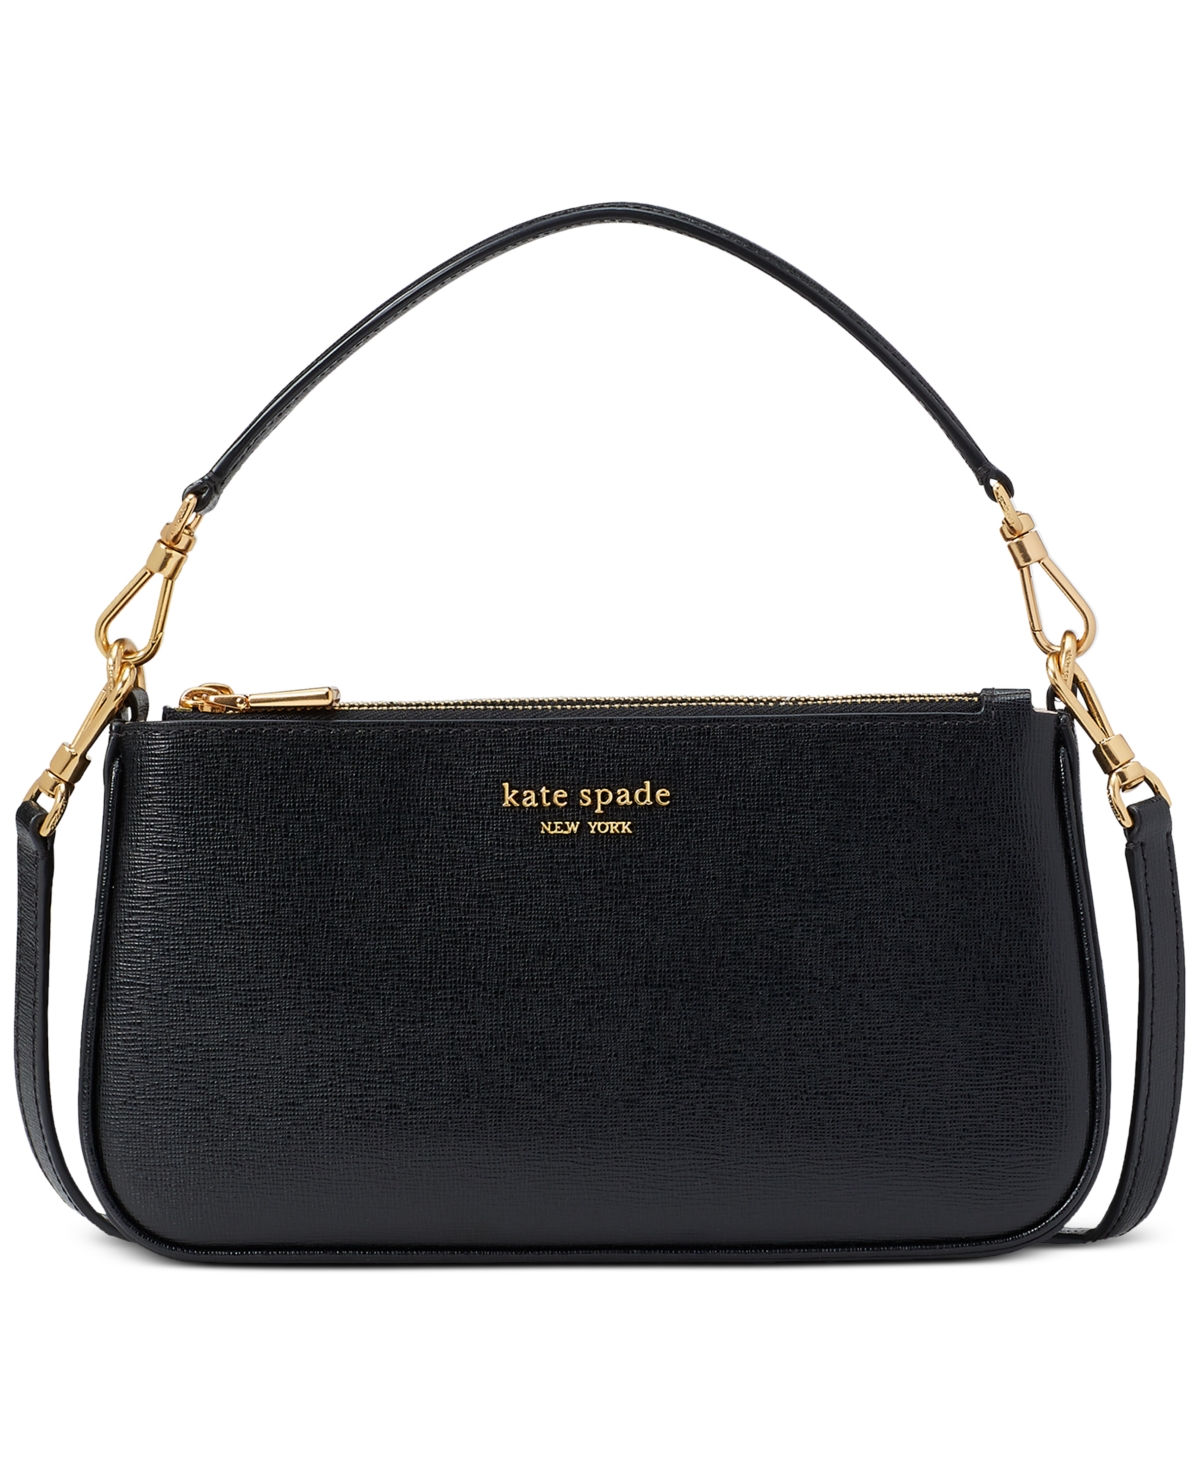 KATE SPADE MORGAN SAFFIANO LEATHER SMALL EAST WEST CROSSBODY